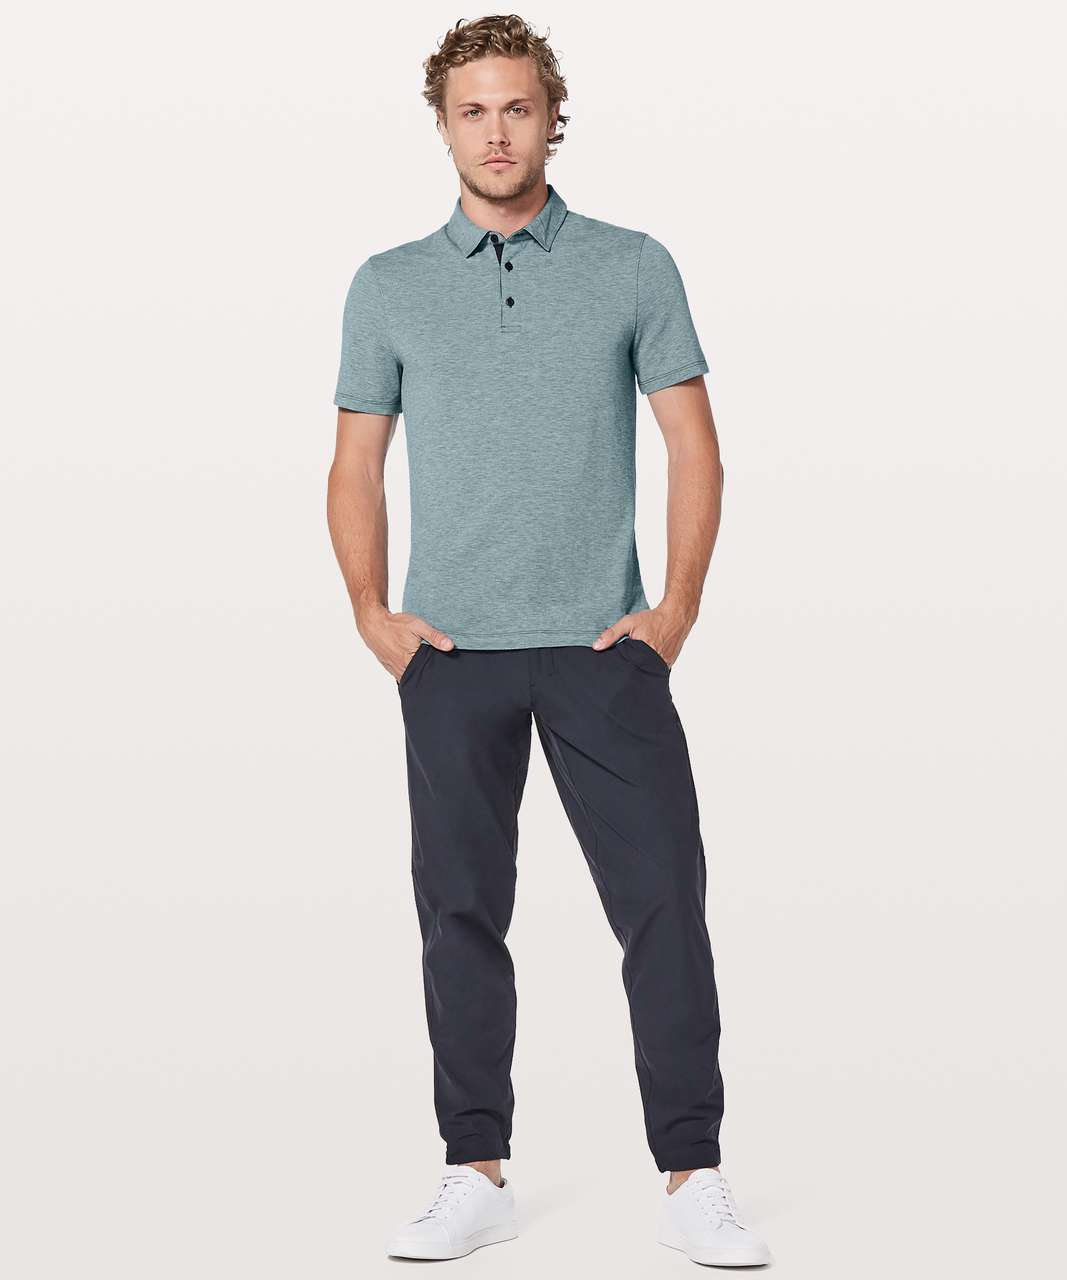 Lululemon Evolution Polo - Heathered Mach Blue (First Release)